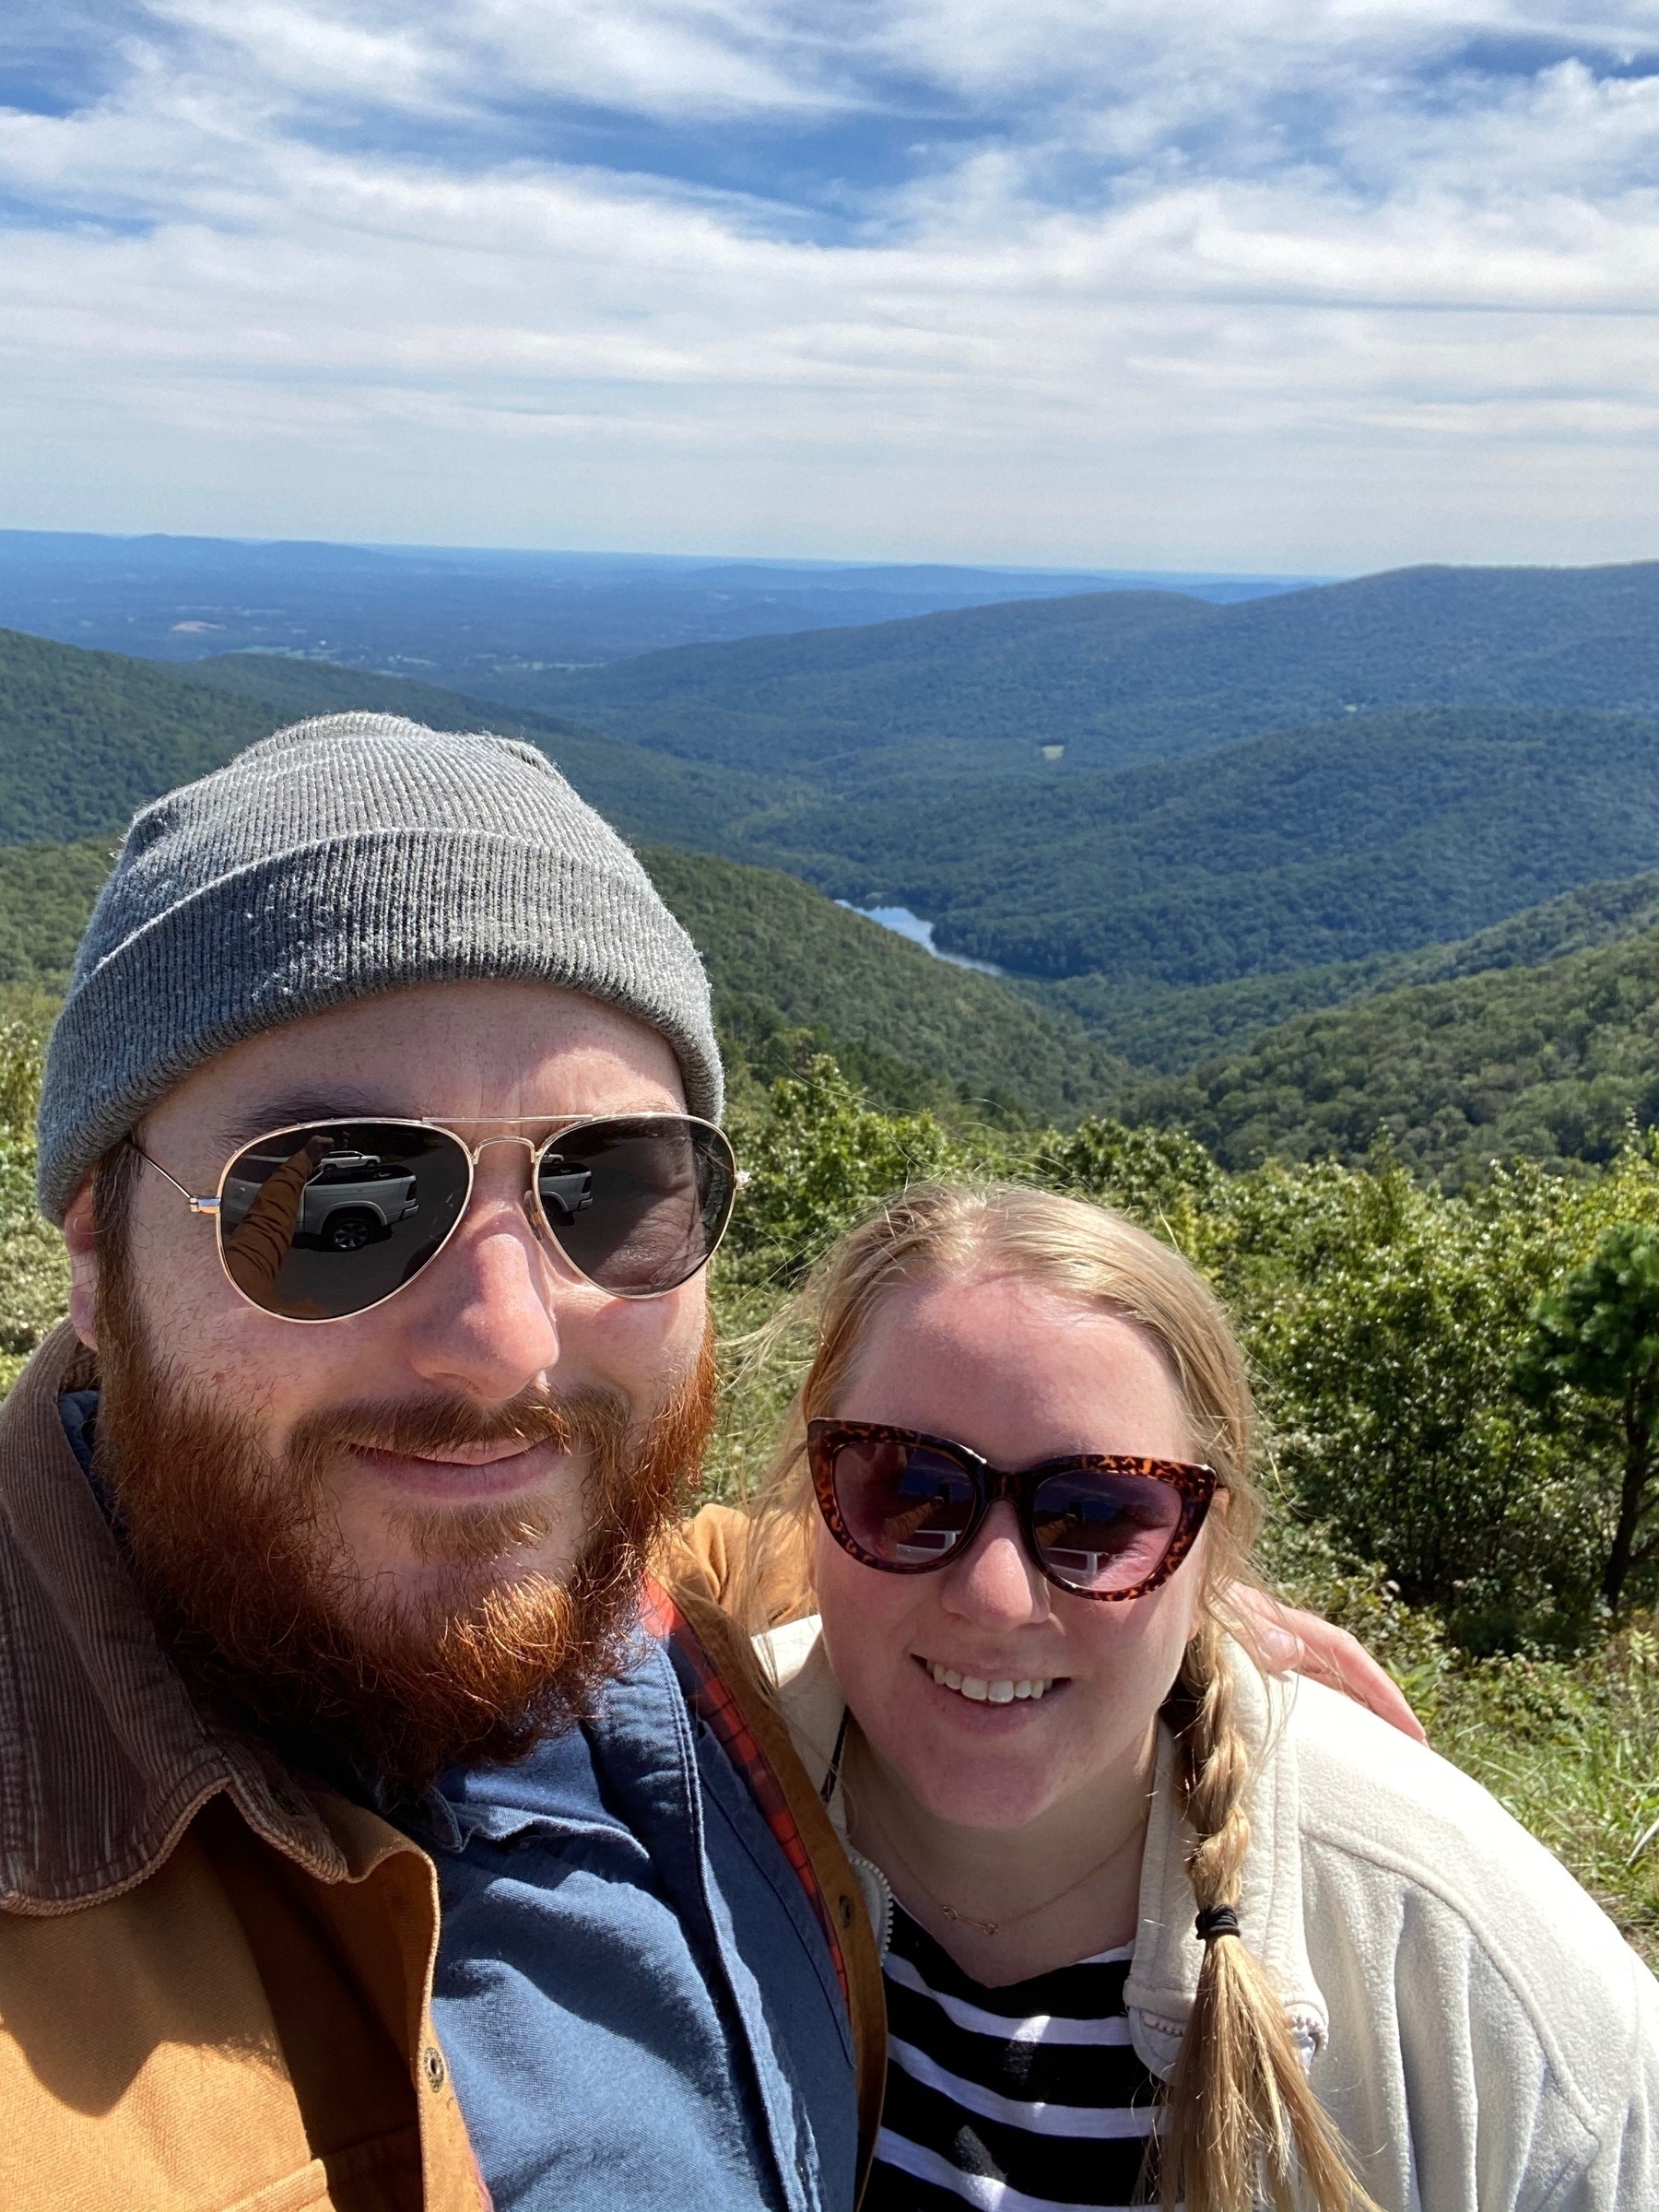 Us at the Moorman’s River Overlook.